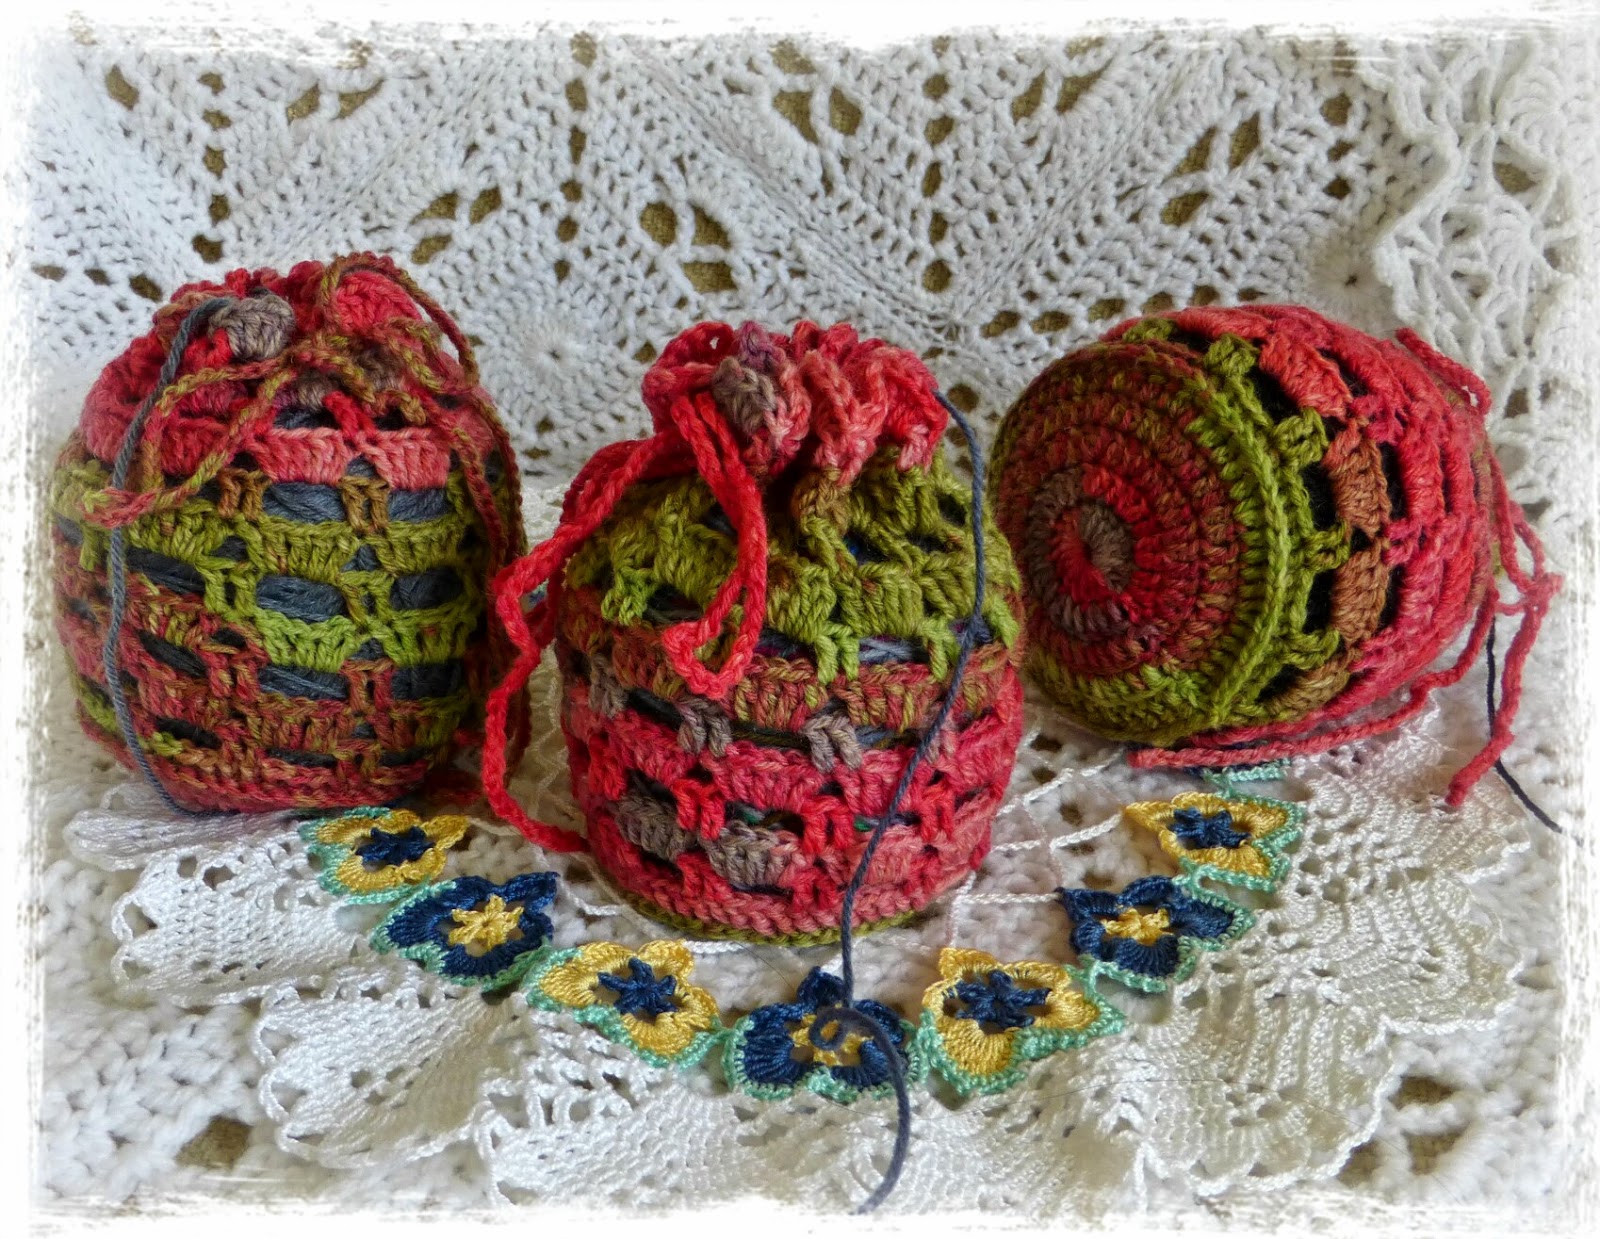 Yellow, Pink and Sparkly: Handy Dandy Sock Yarn Bags